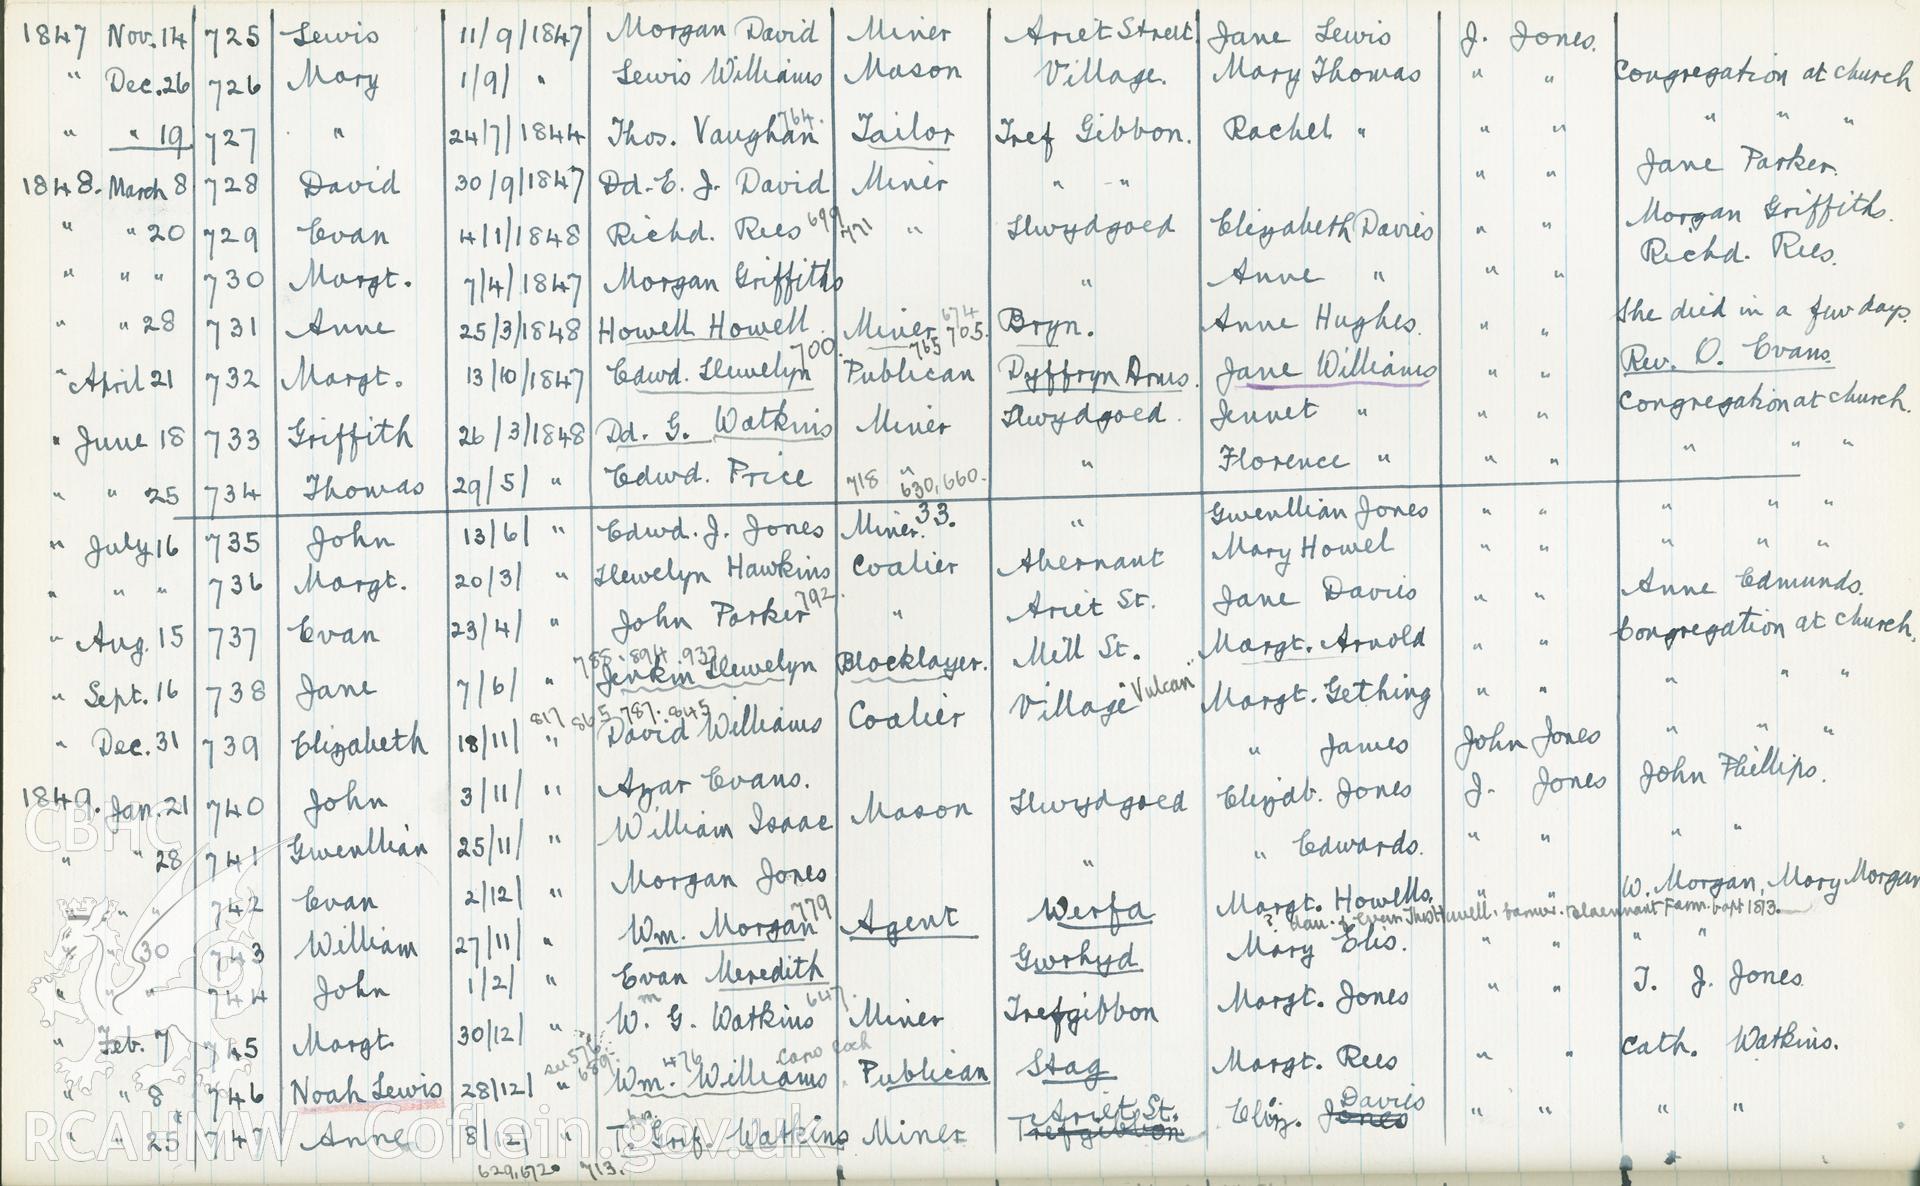 "Baptism Registered" book for Hen Dy Cwrdd, made between April 19th and 28th, 1941, by W. W. Price. Page listing baptisms from 14th November 1847 to 25th January 1849. Donated to the RCAHMW as part of the Digital Dissent Project.